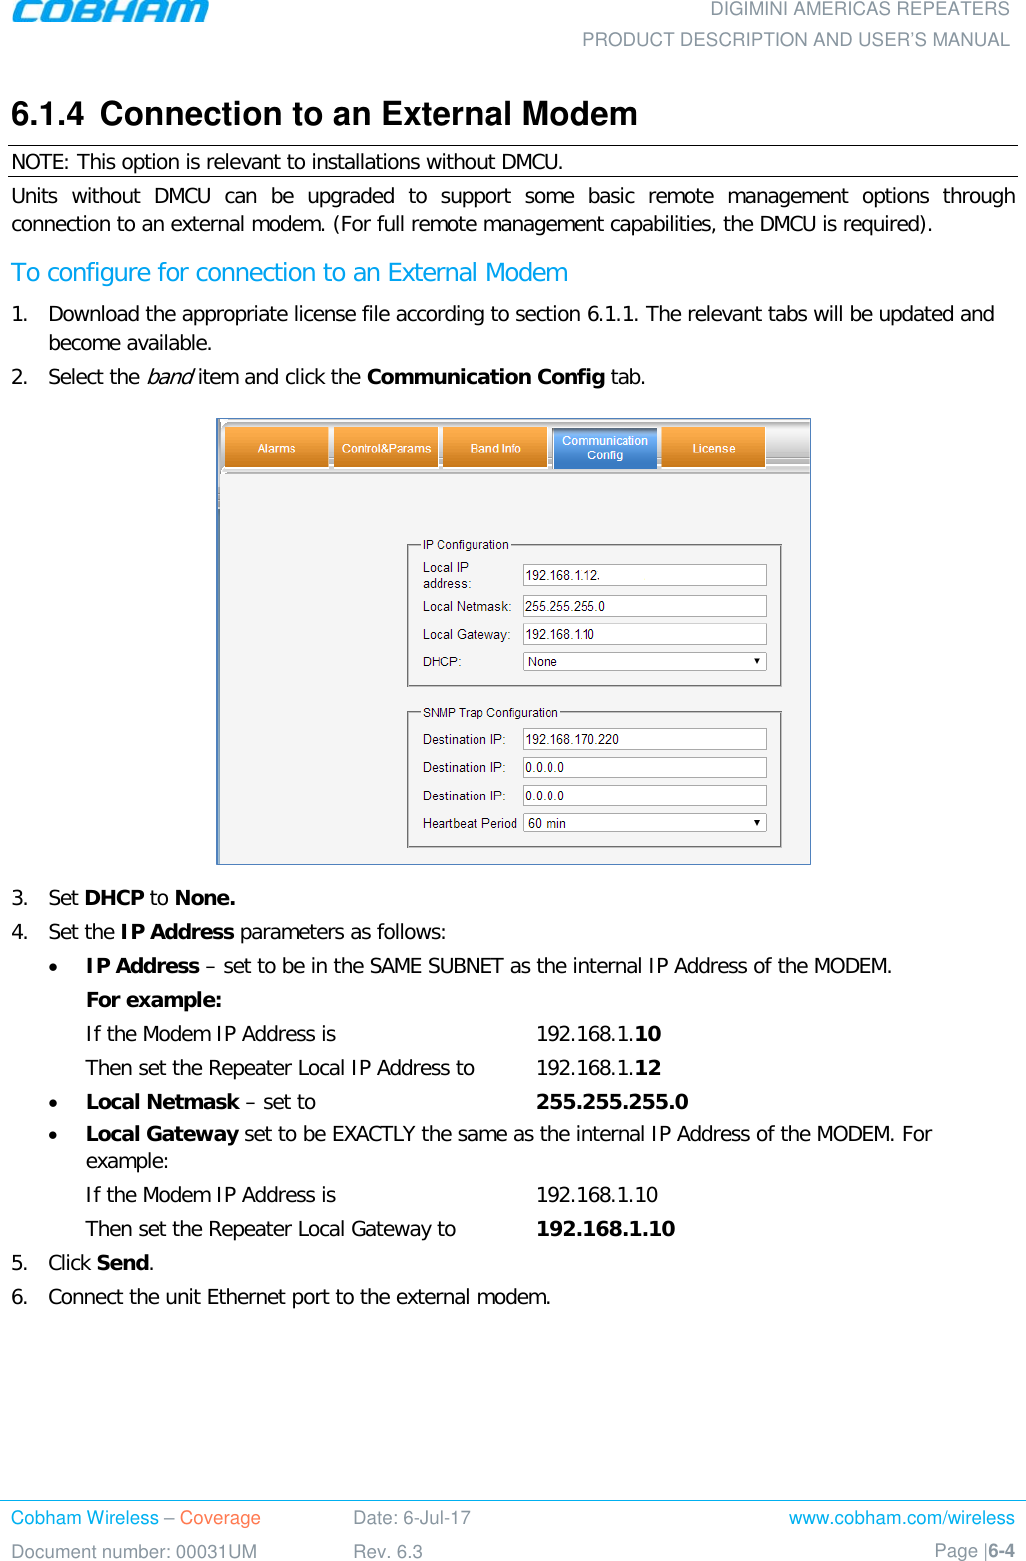  DIGIMINI AMERICAS REPEATERS PRODUCT DESCRIPTION AND USER’S MANUAL Cobham Wireless – Coverage Date: 6-Jul-17 www.cobham.com/wireless Document number: 00031UM Rev. 6.3 Page |6-4  6.1.4  Connection to an External Modem NOTE: This option is relevant to installations without DMCU. Units without DMCU can be upgraded to support some basic remote management options through connection to an external modem. (For full remote management capabilities, the DMCU is required). To configure for connection to an External Modem 1.  Download the appropriate license file according to section  6.1.1. The relevant tabs will be updated and become available.  2.  Select the band item and click the Communication Config tab.  3.  Set DHCP to None.  4.  Set the IP Address parameters as follows: • IP Address – set to be in the SAME SUBNET as the internal IP Address of the MODEM.  For example: If the Modem IP Address is    192.168.1.10 Then set the Repeater Local IP Address to  192.168.1.12 • Local Netmask – set to    255.255.255.0 • Local Gateway set to be EXACTLY the same as the internal IP Address of the MODEM. For example: If the Modem IP Address is    192.168.1.10 Then set the Repeater Local Gateway to  192.168.1.10 5.  Click Send. 6.  Connect the unit Ethernet port to the external modem. 